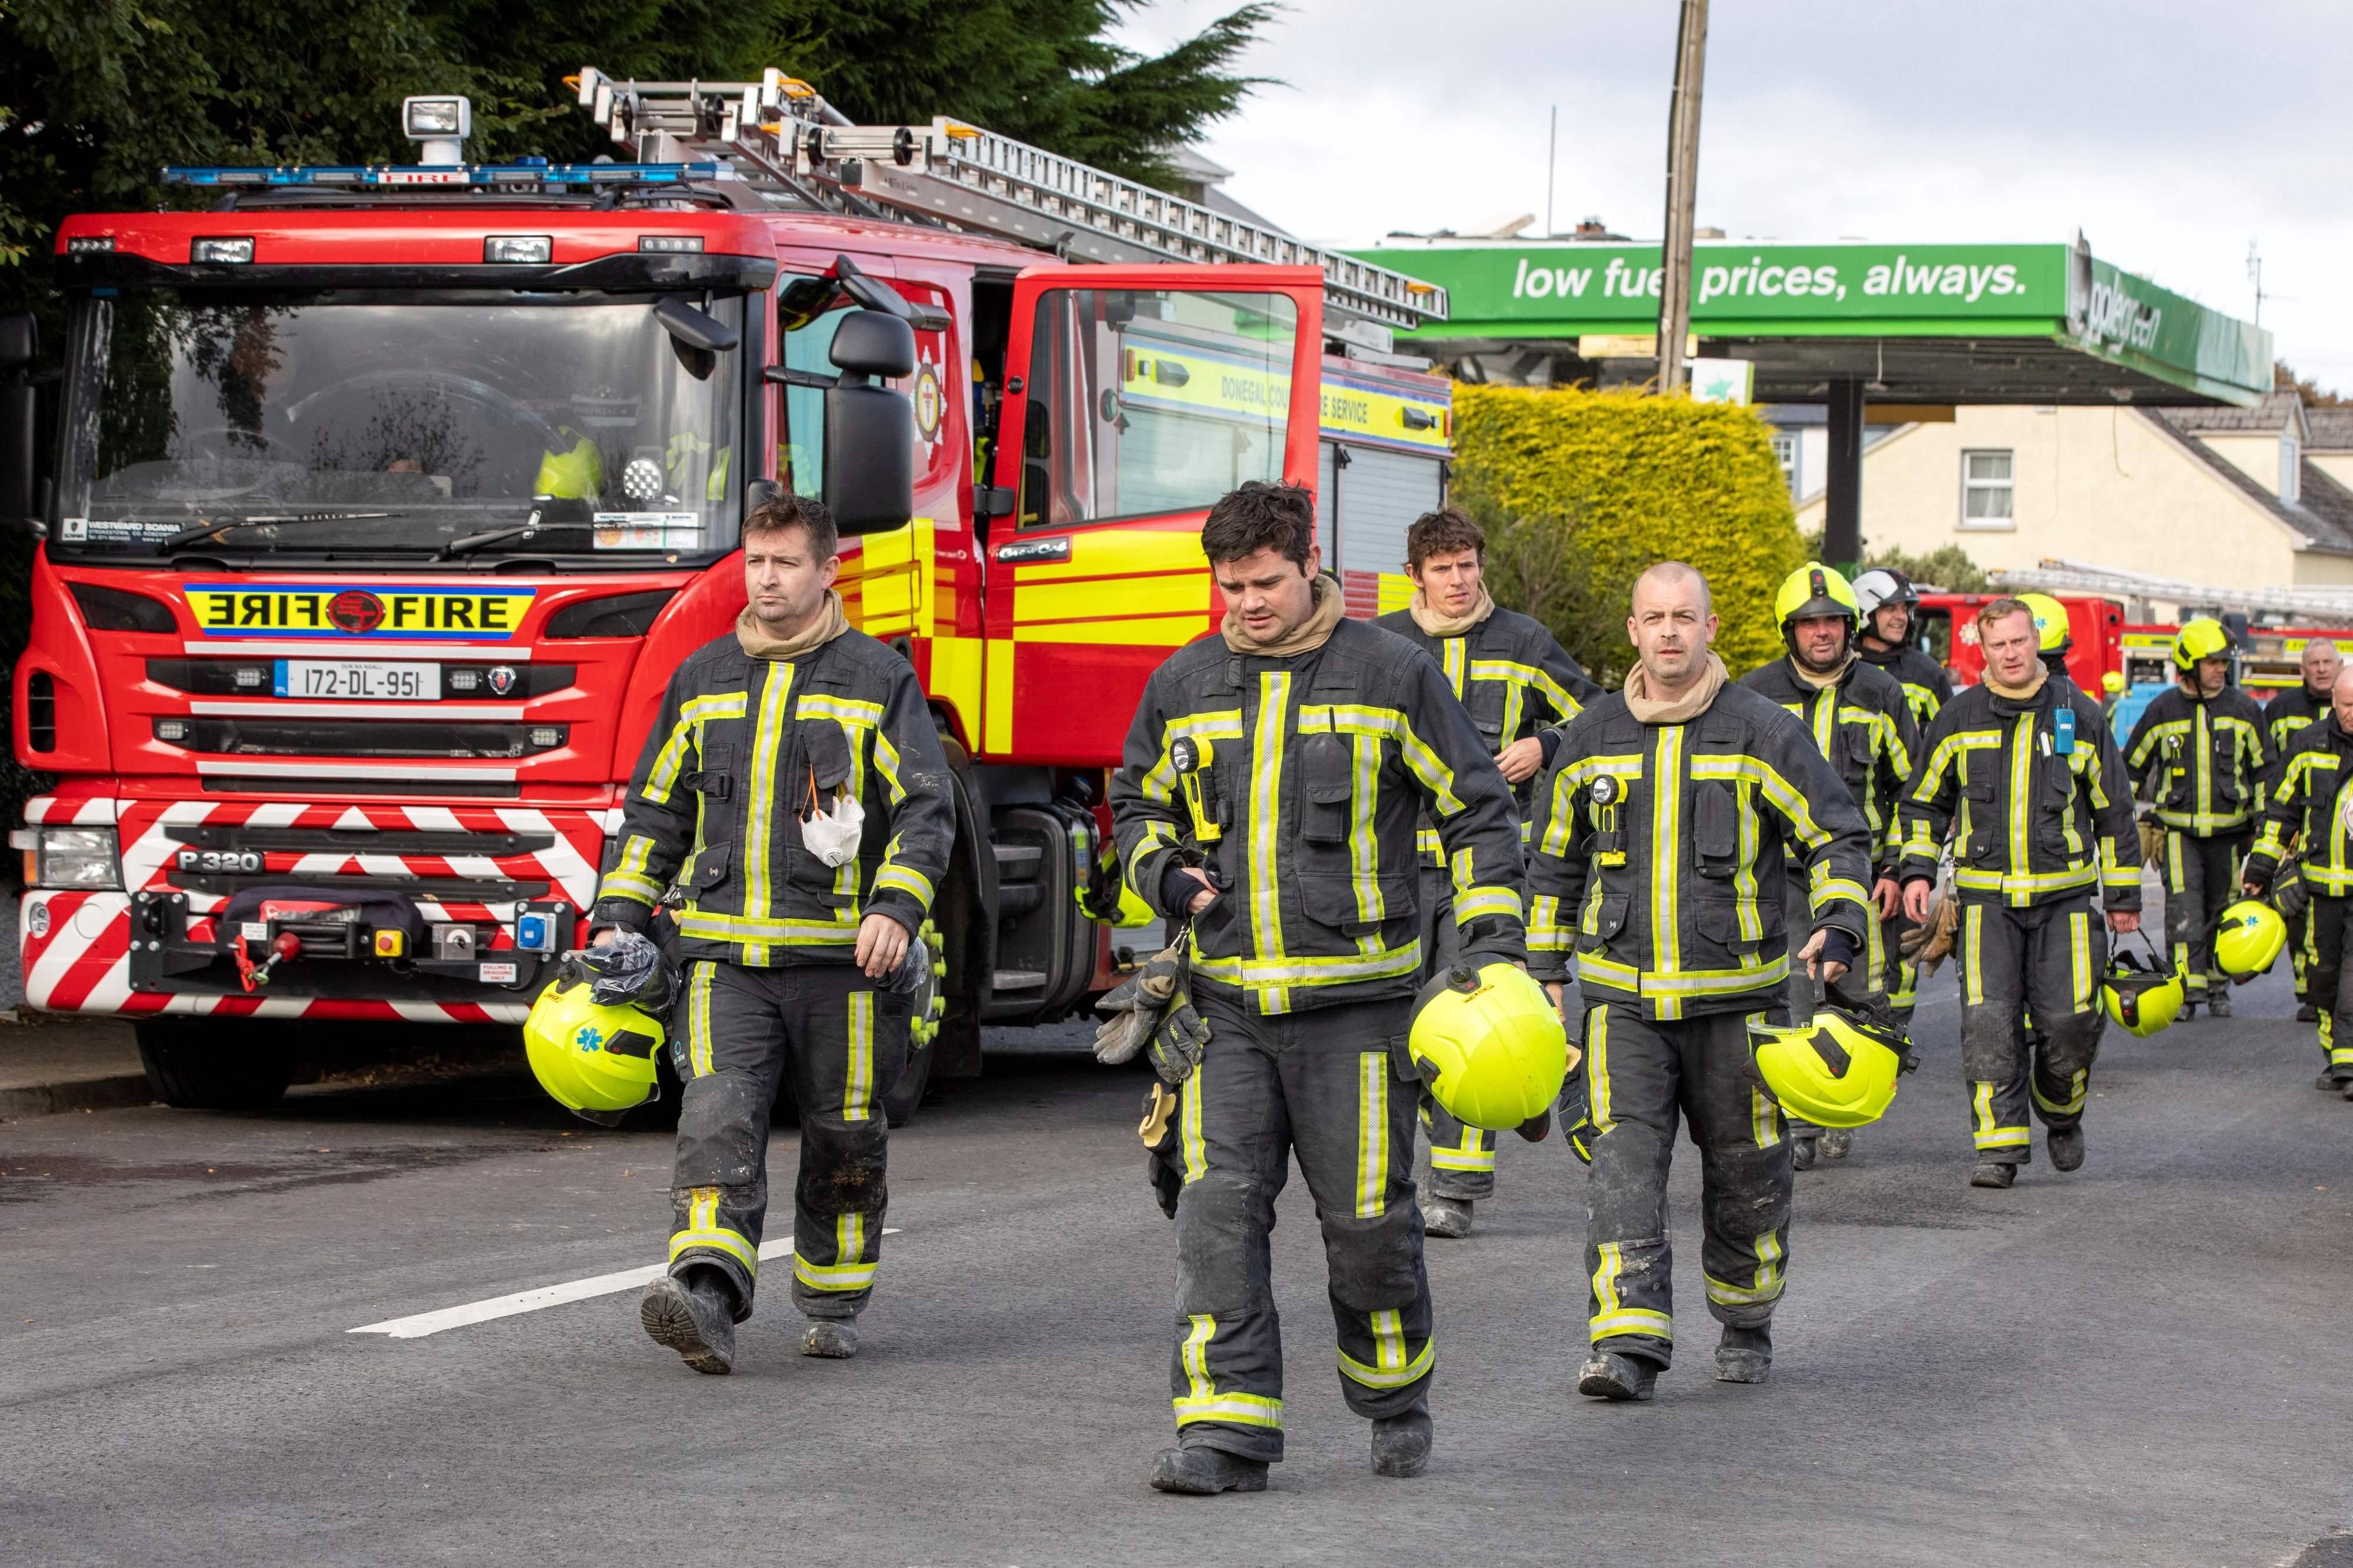 Firefighters at the scene were praised for their efforts